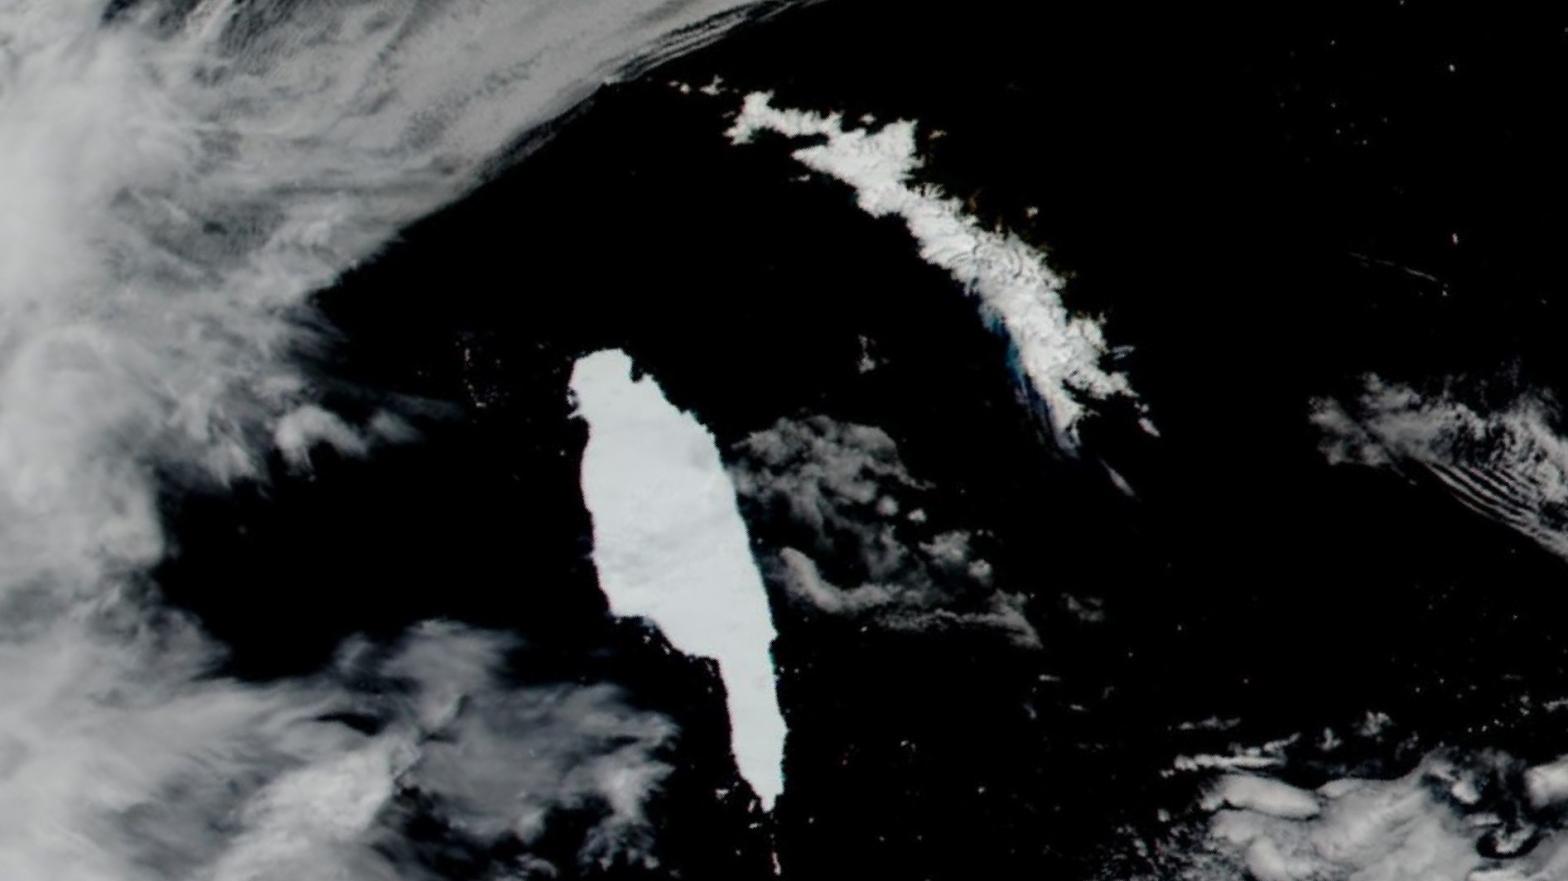 Iceberg A68a (the object shaped like a hand pointing downward) approaching South Georgia island. (Image: Lauren Dauphin/MODIS/NASA EOSDIS/LANCE/GIBS/Worldview)